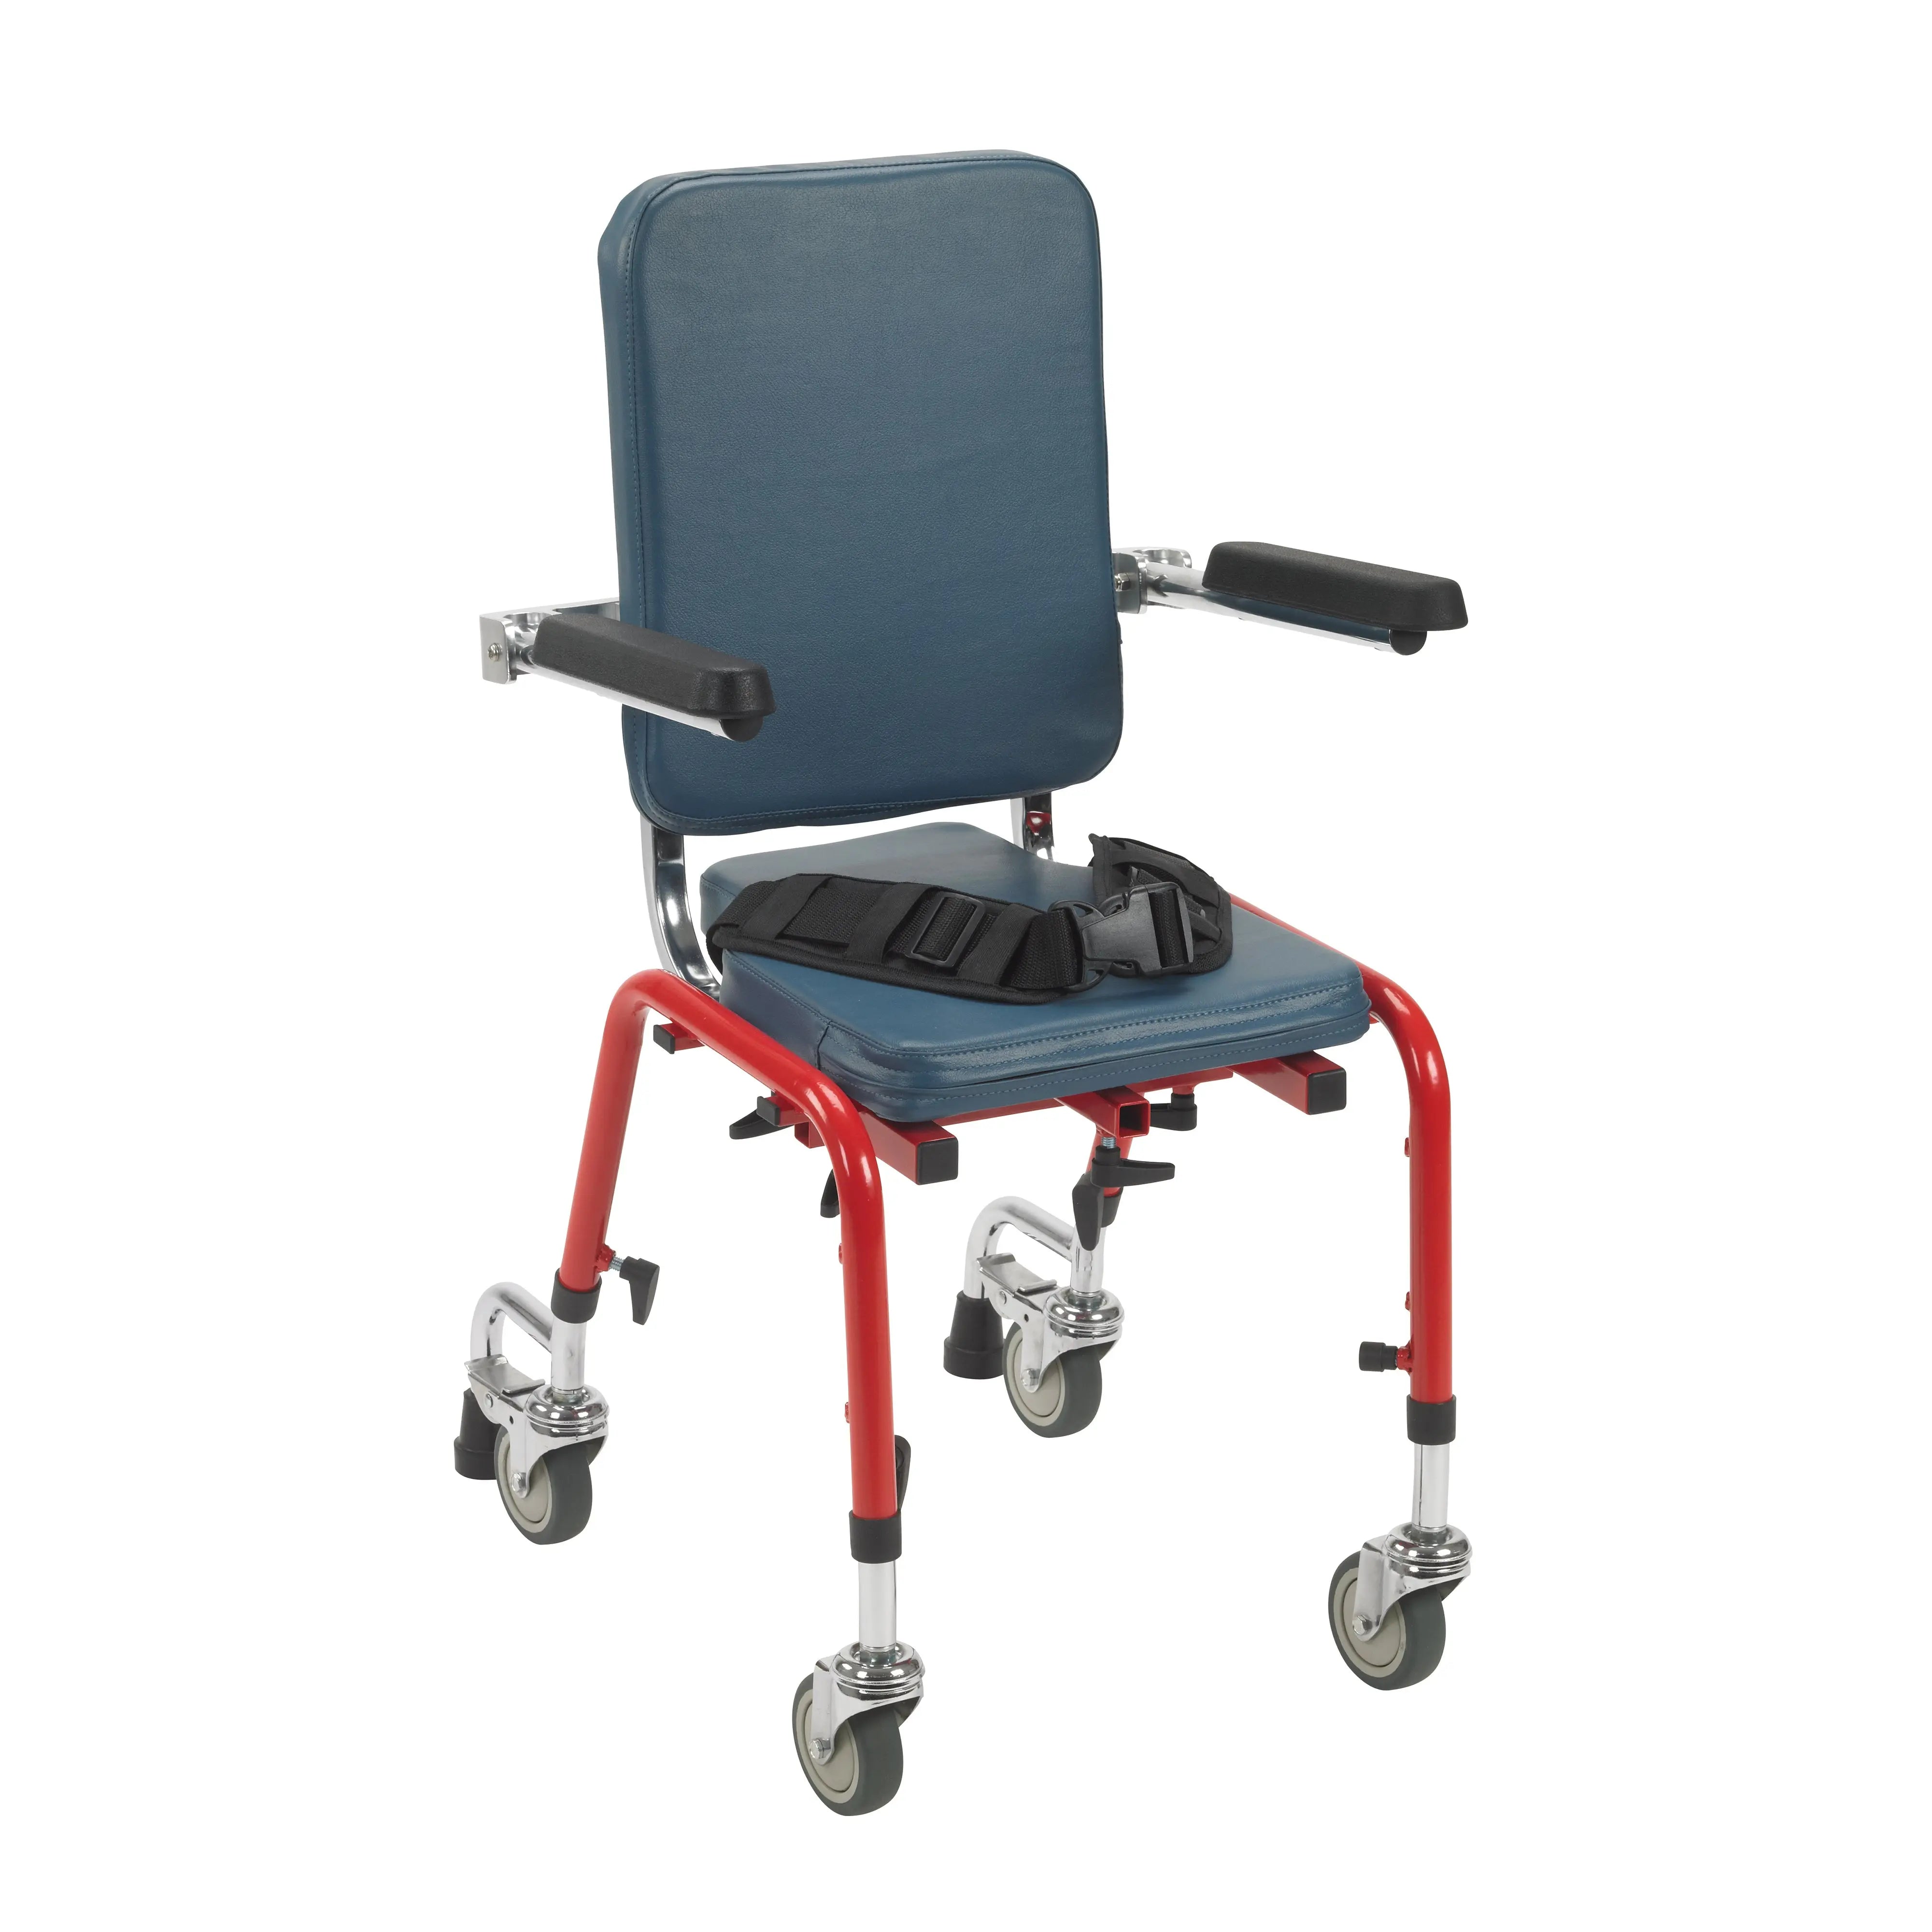 First Class School Chair Legs w/ Casters - Home Health Store Inc